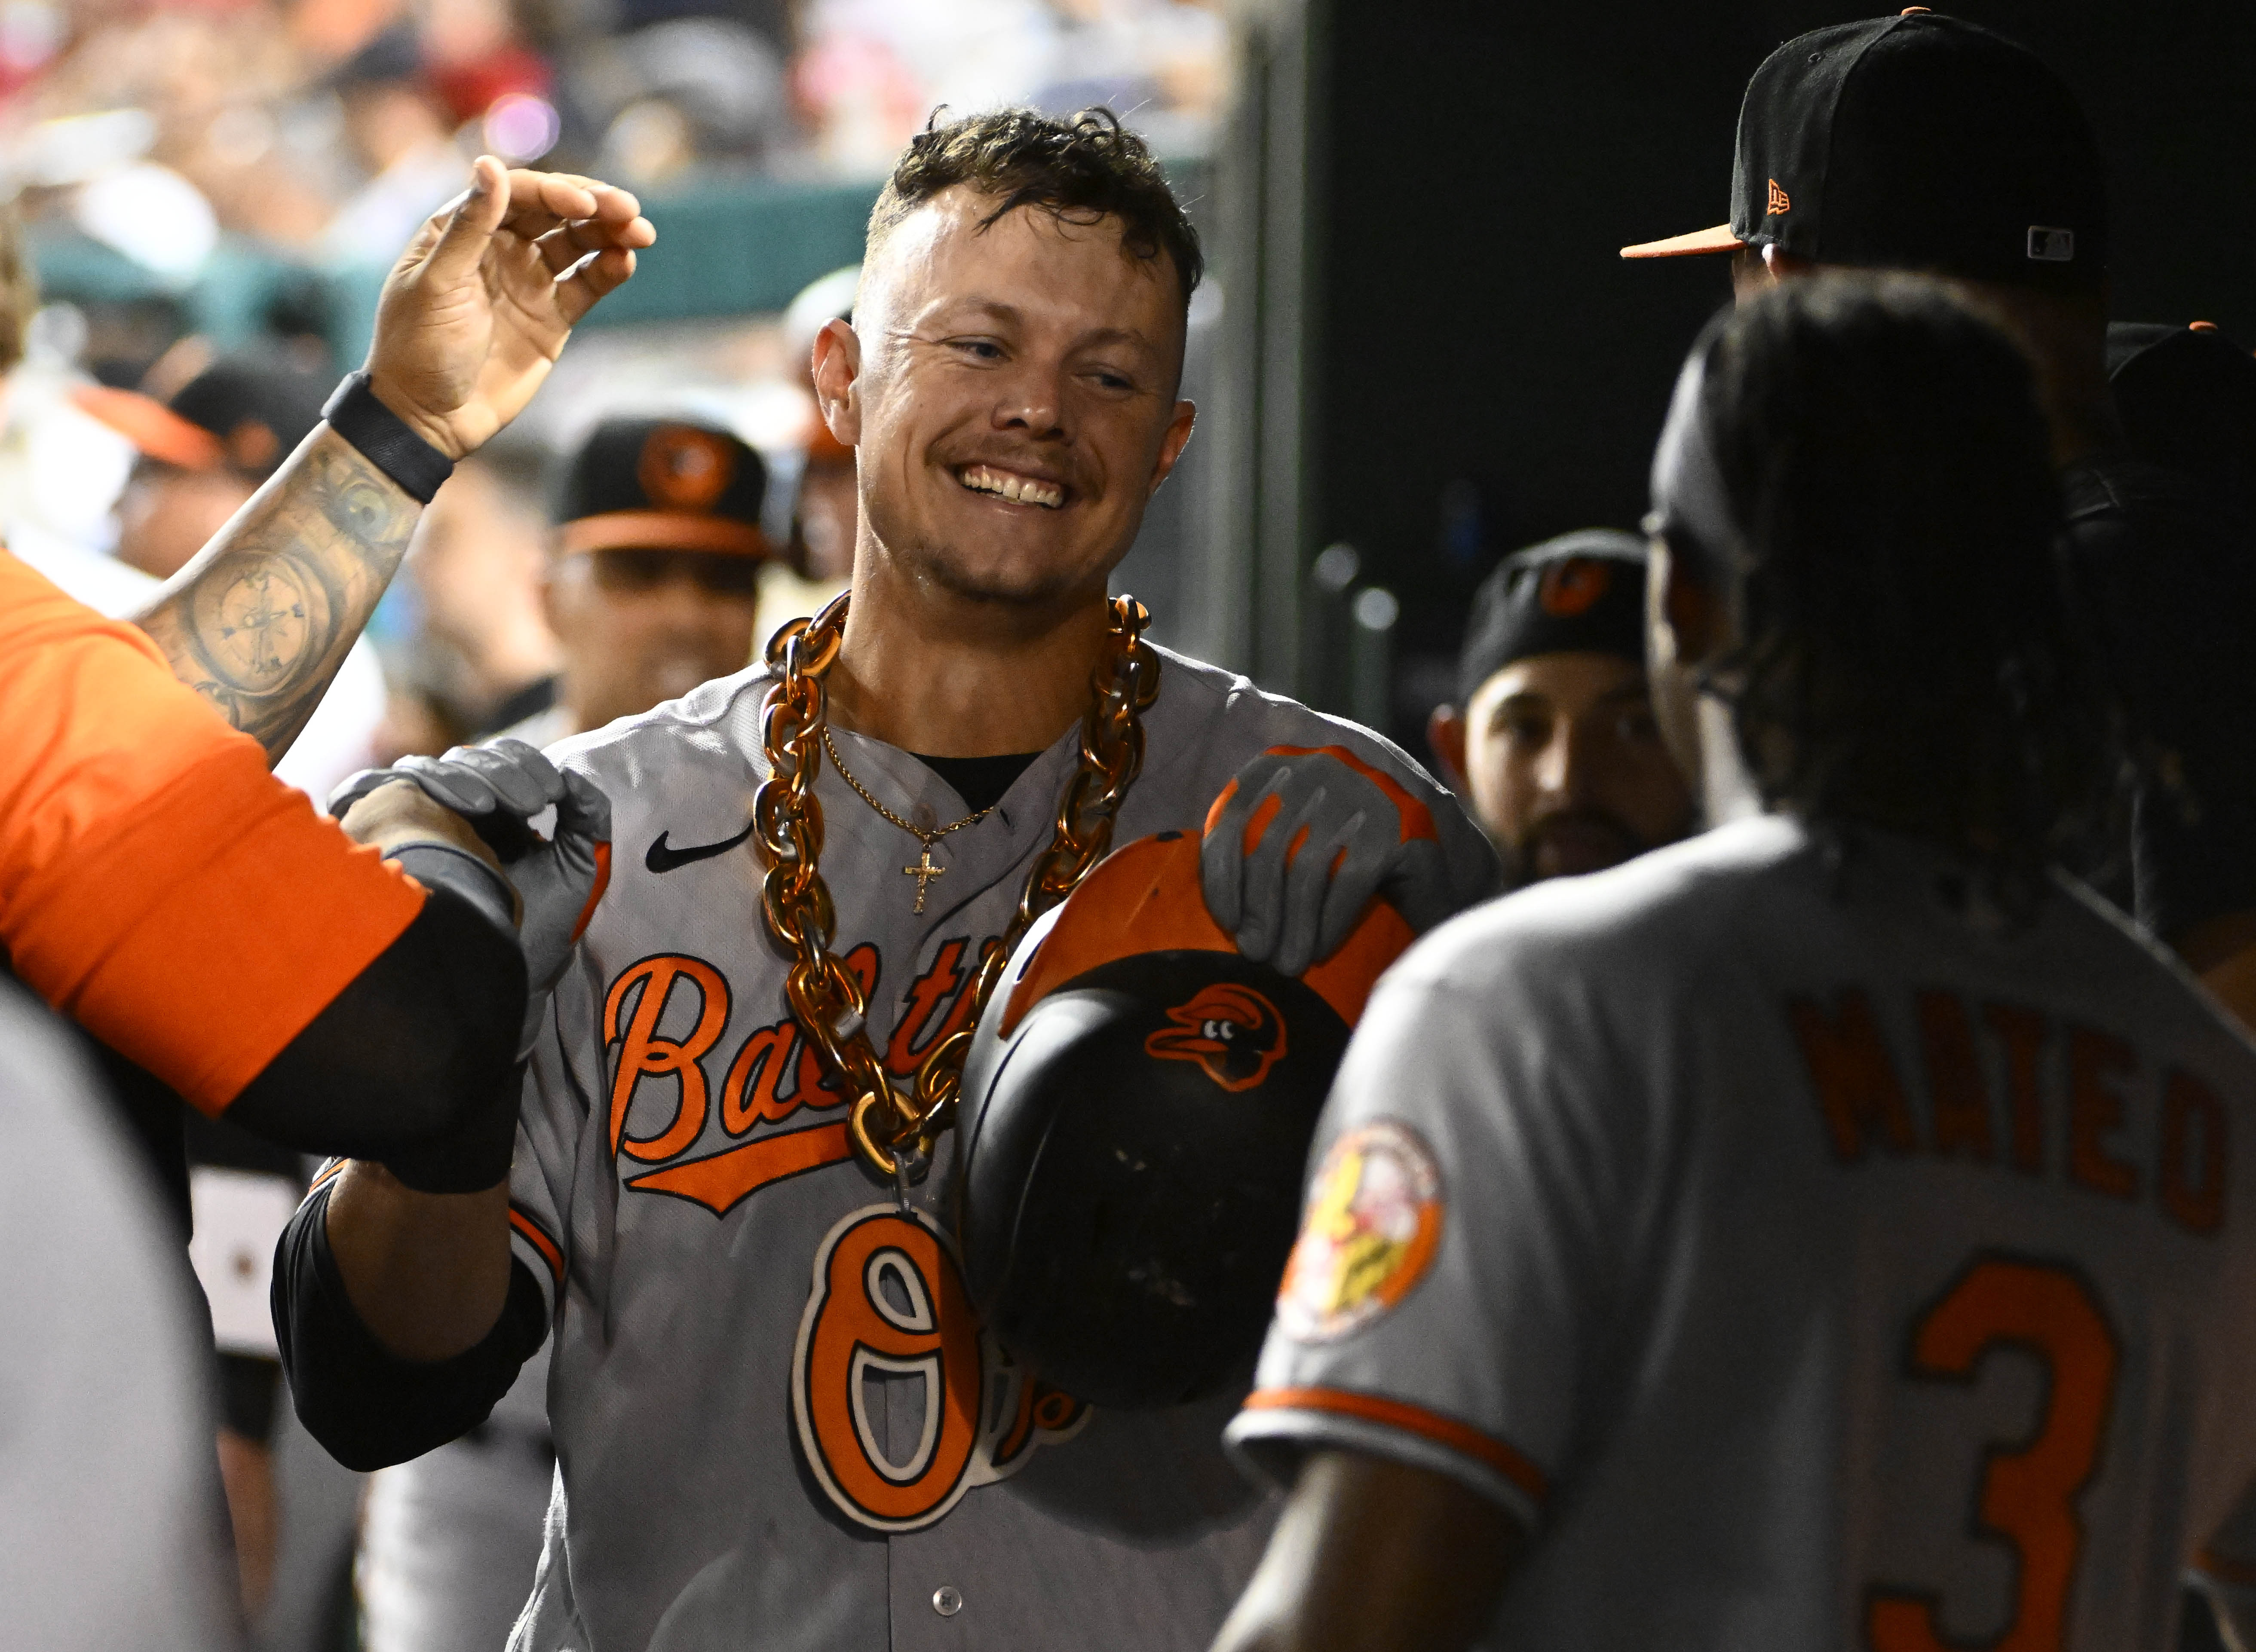 Ryan Mountcastle of the Baltimore Orioles celebrates in the dugout after hitting a game-tying home run